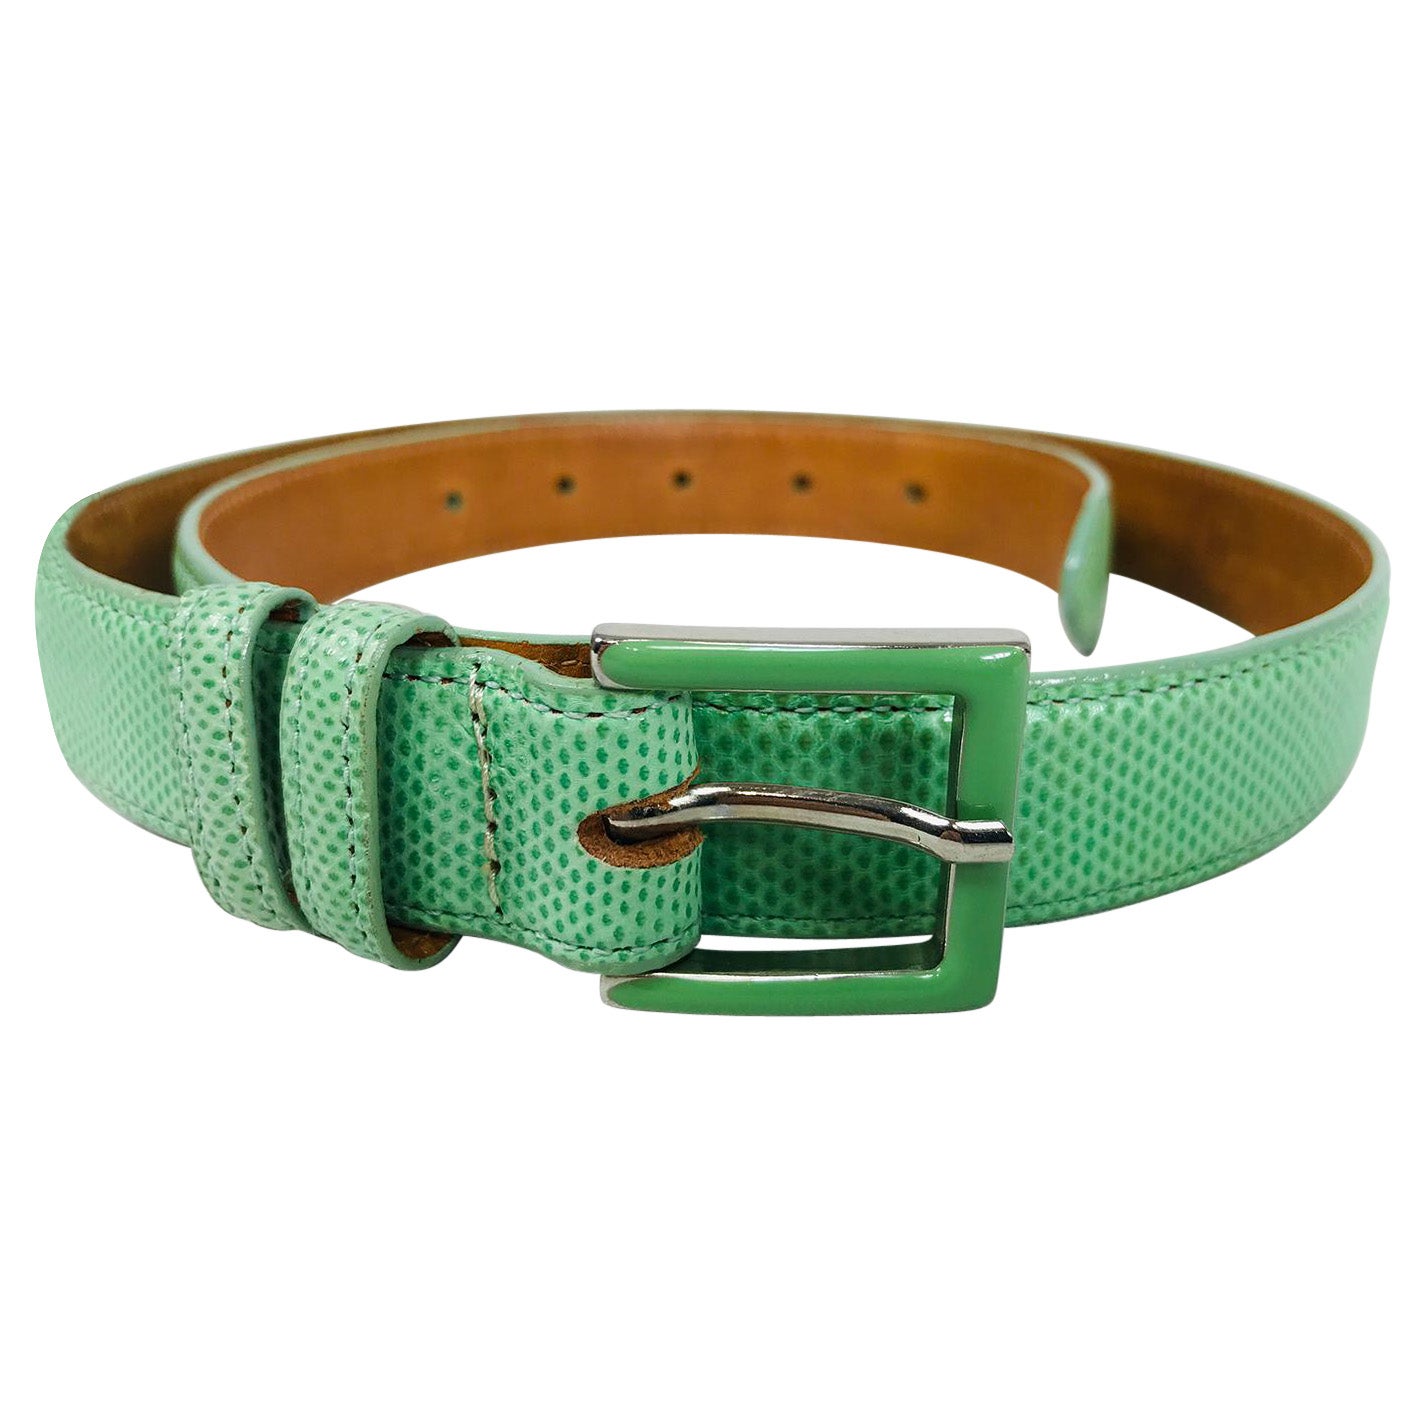 LOUIS VUITTON LV Initiales Belt - More Than You Can Imagine